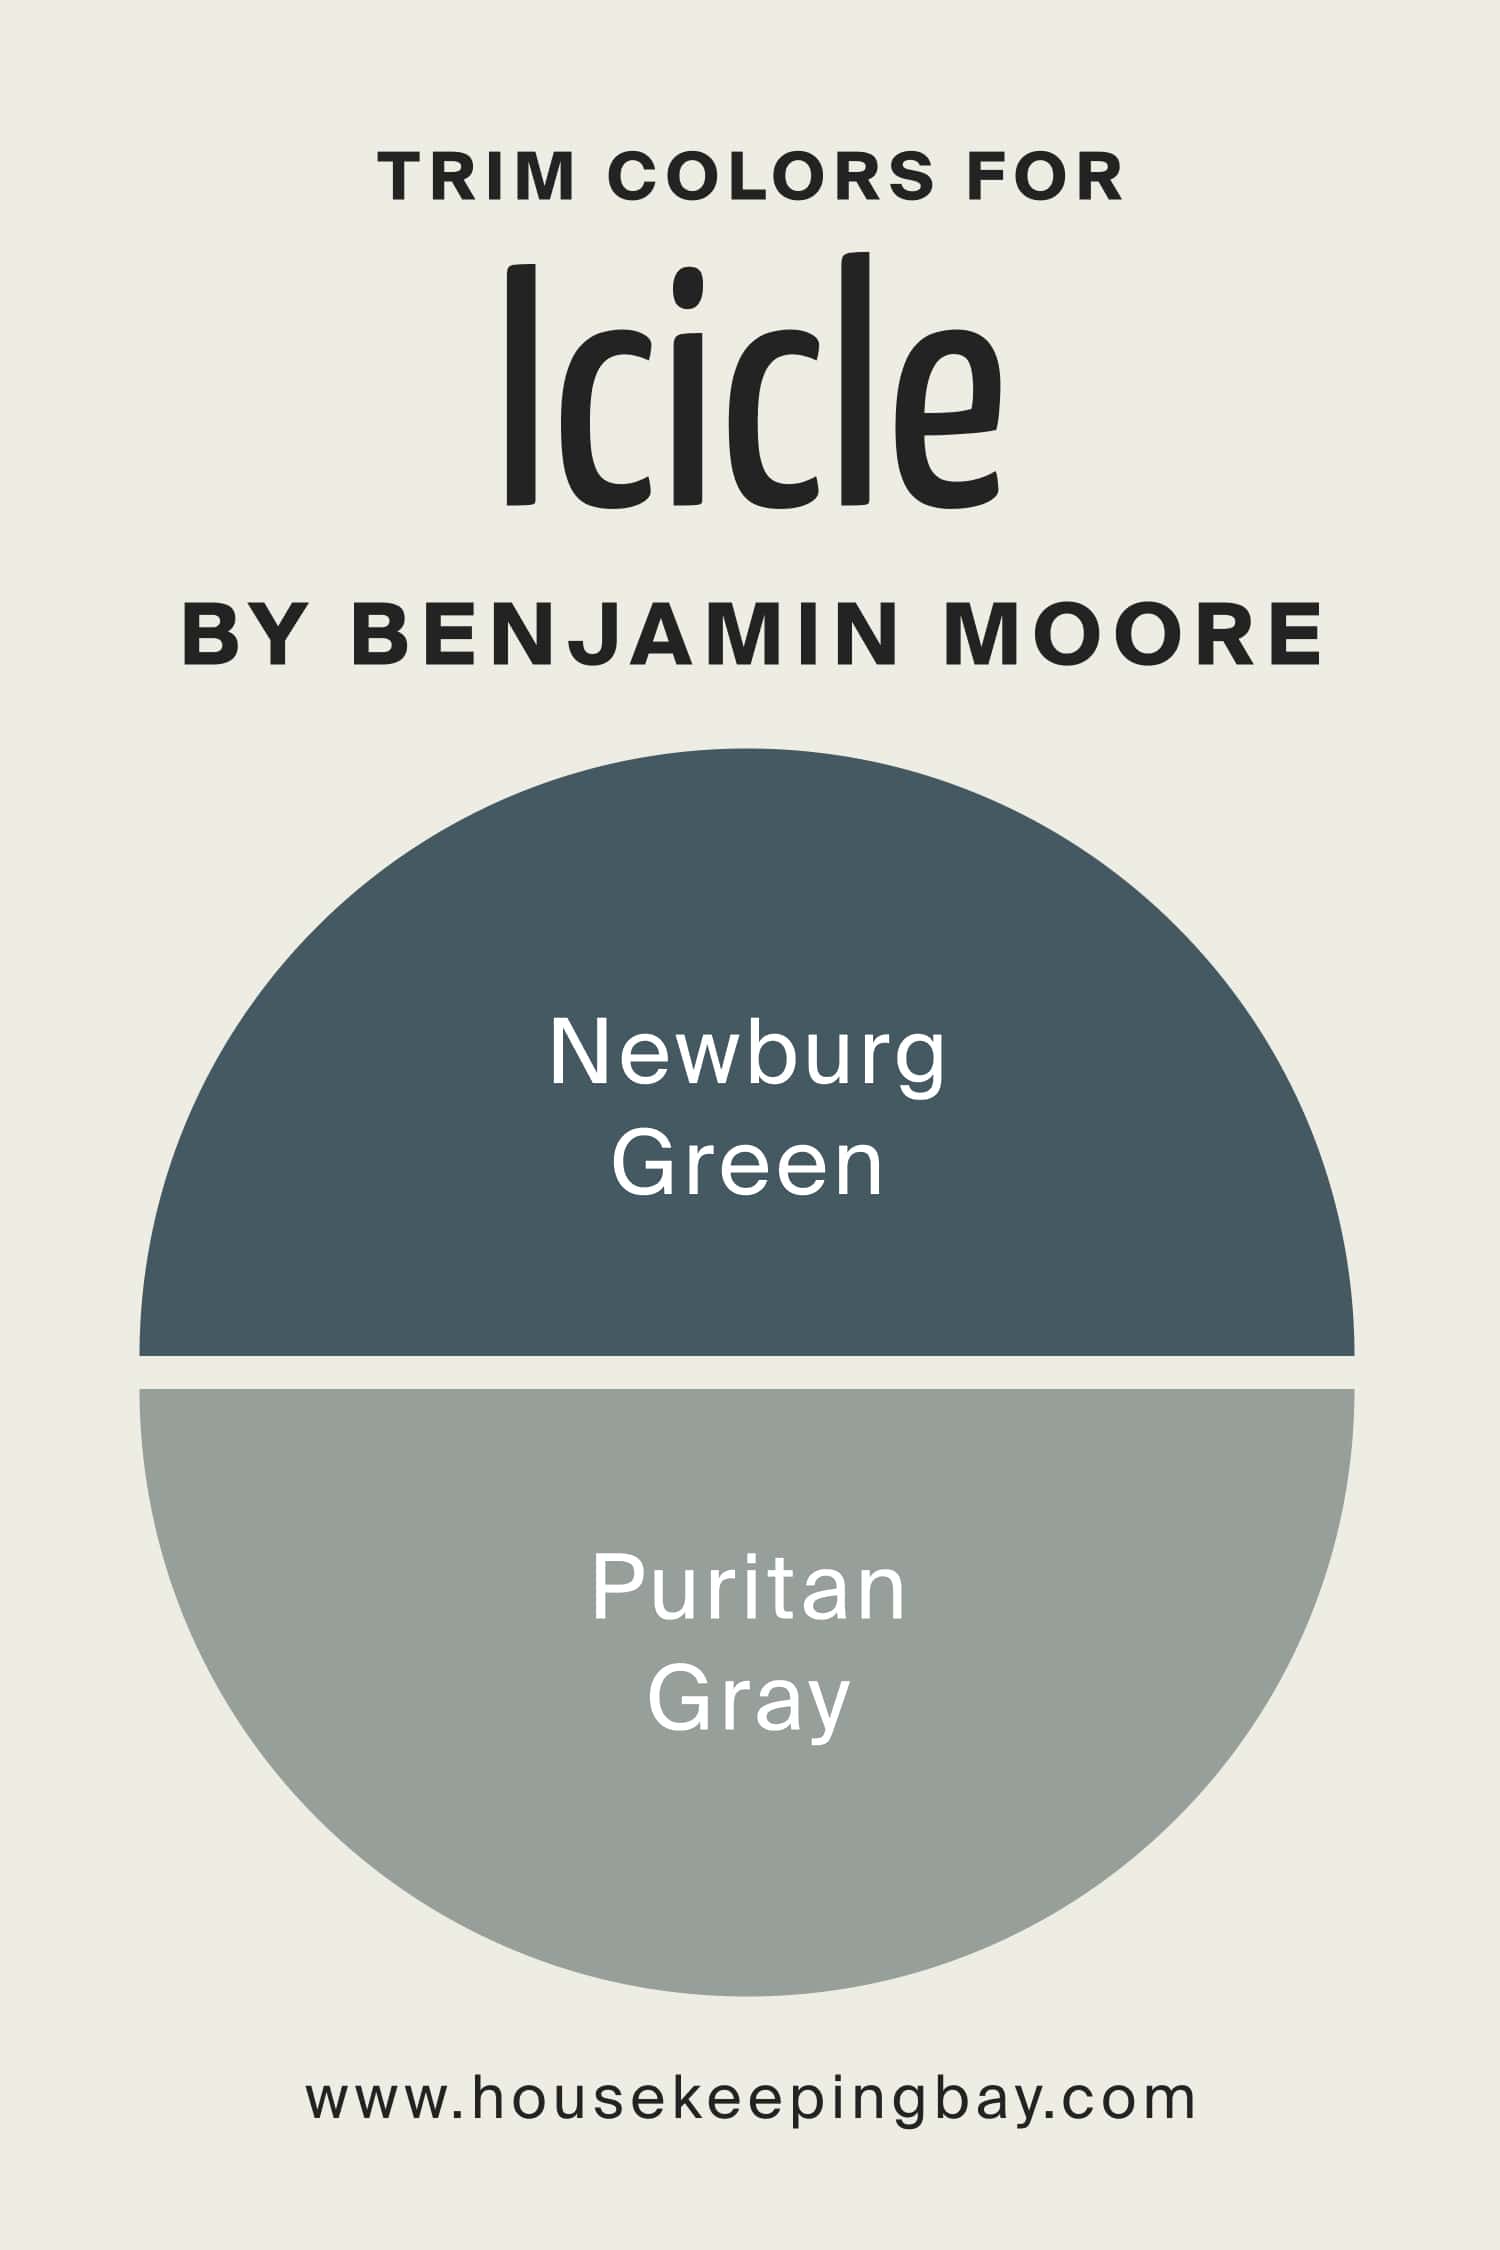 Trim Colors for Icicle 2142 70 by Benjamin Moore